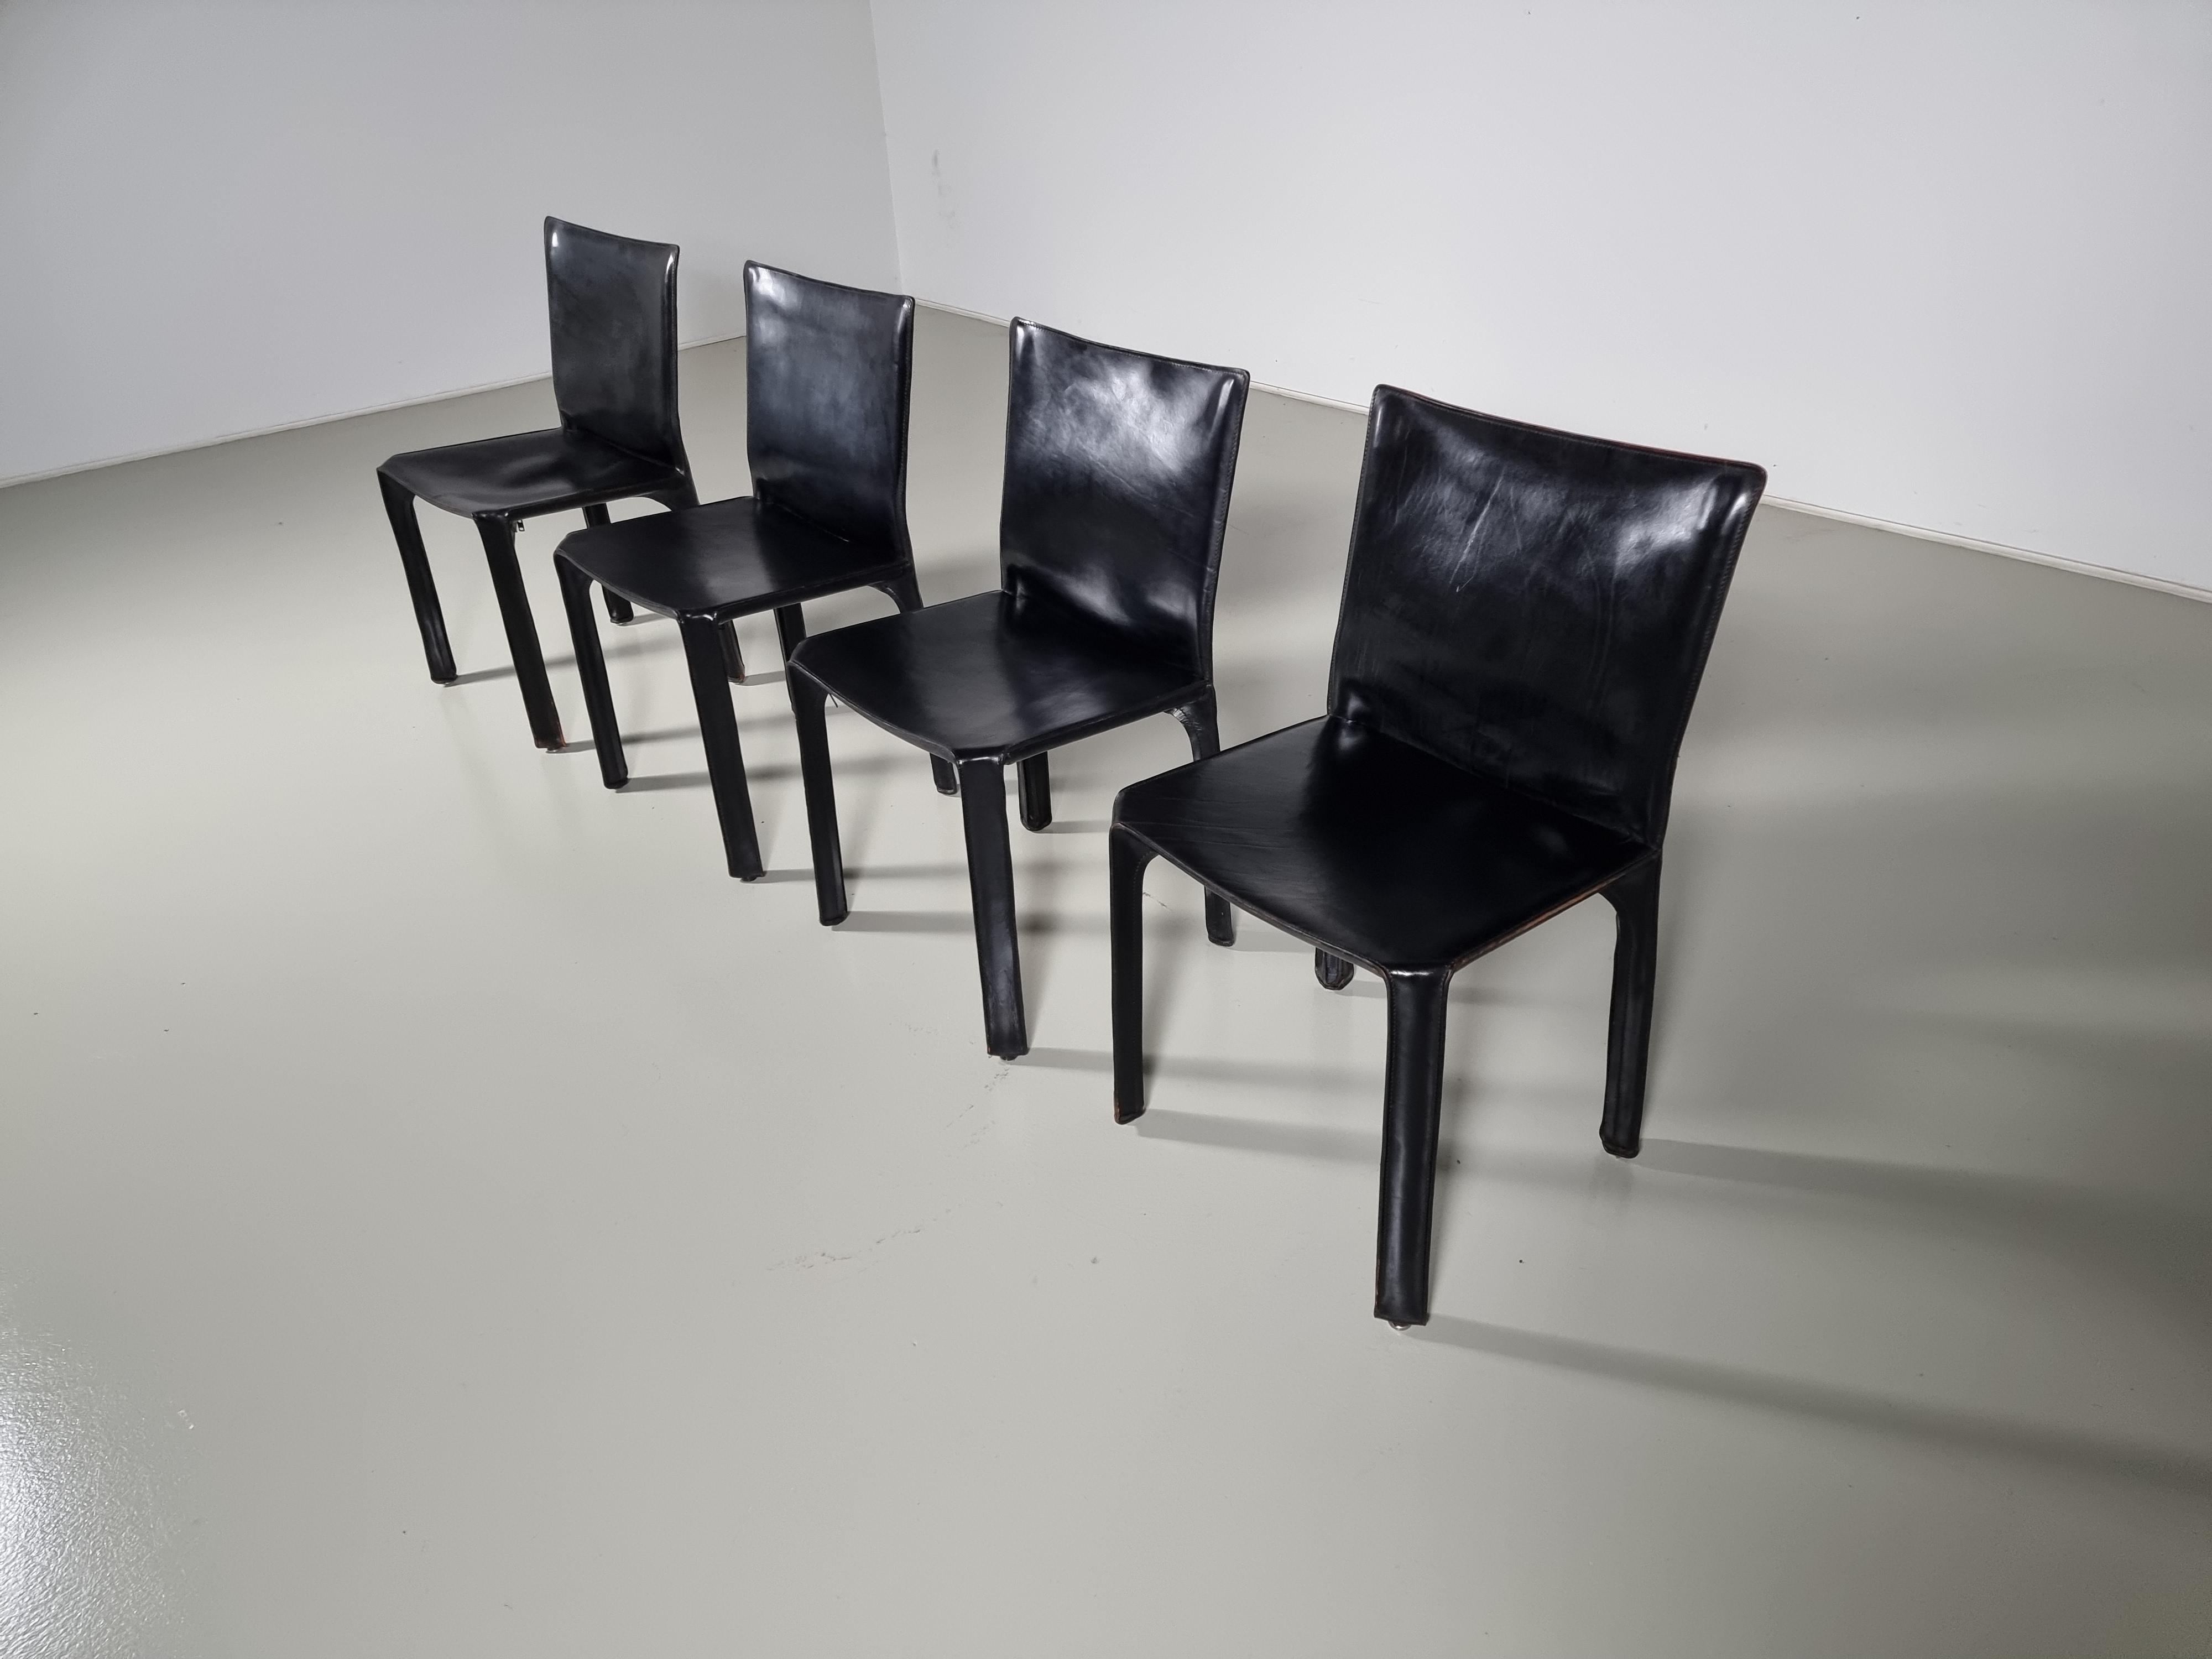 Set of 4 early edition CAB-412 dining room chairs in black saddle leather. Designed by Mario Bellini and manufactured by Cassina in the 1970s in Italy. The leather cover is stretched over a minimal tubular steel frame. The only additional